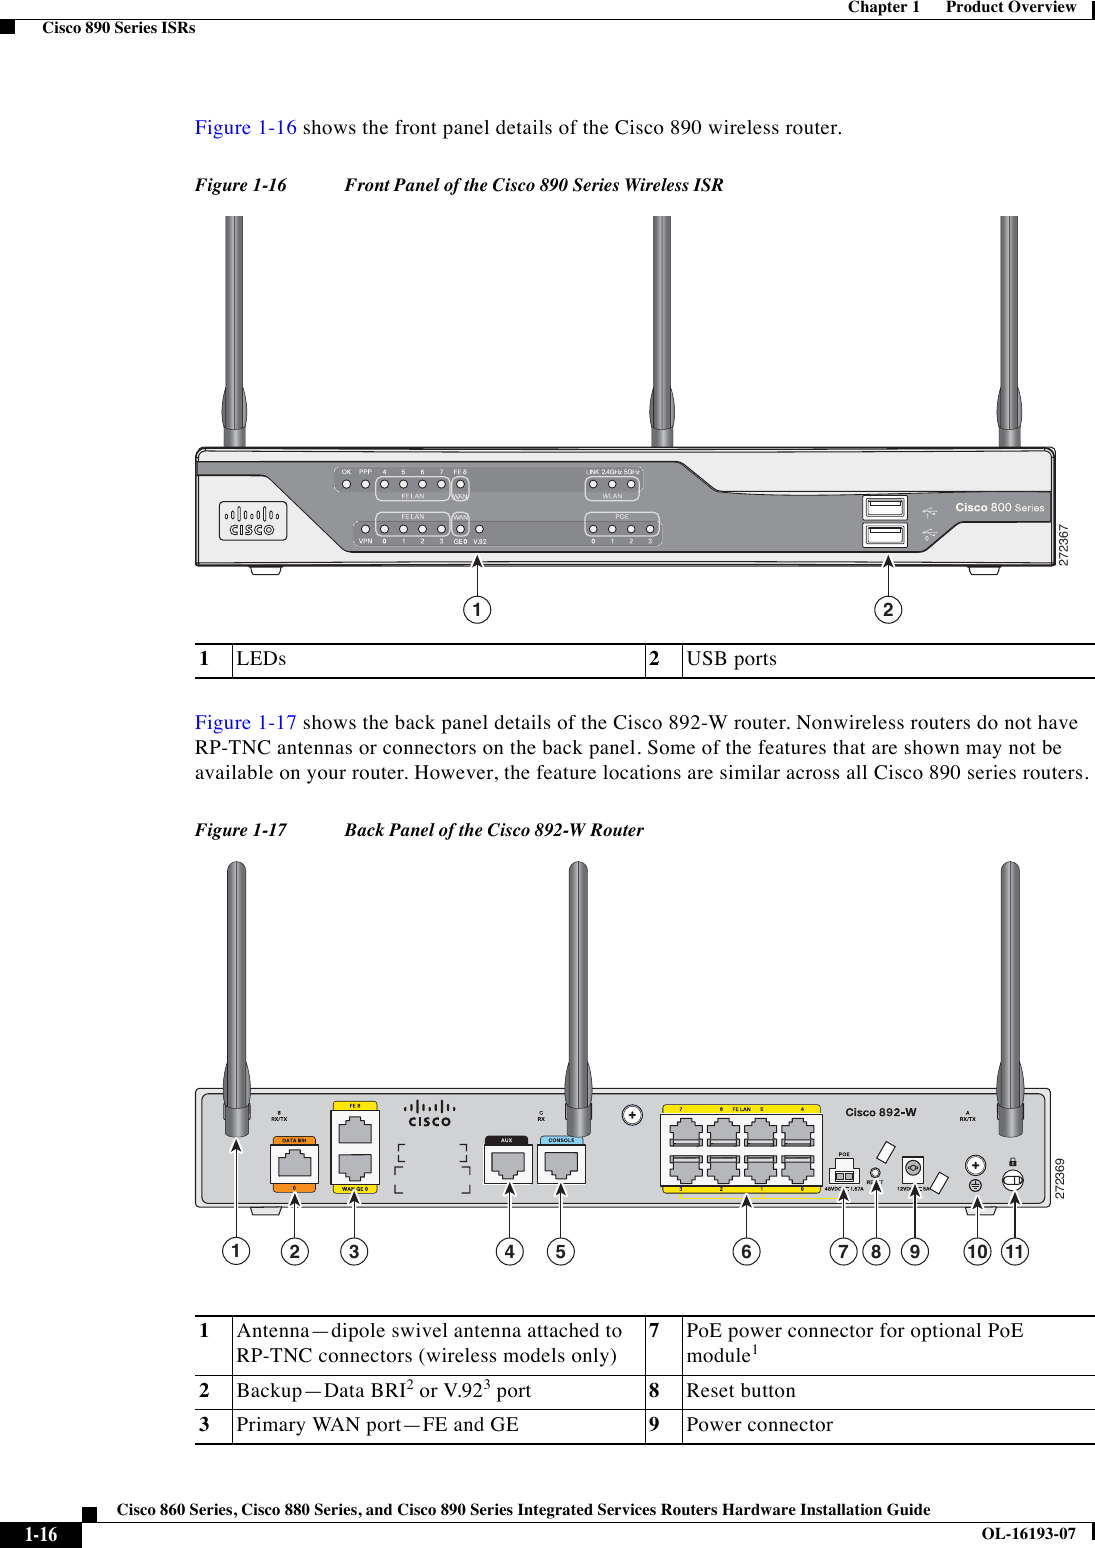  1-16Cisco 860 Series, Cisco 880 Series, and Cisco 890 Series Integrated Services Routers Hardware Installation GuideOL-16193-07Chapter 1      Product Overview  Cisco 890 Series ISRsFigure 1-16 shows the front panel details of the Cisco 890 wireless router.Figure 1-16 Front Panel of the Cisco 890 Series Wireless ISRFigure 1-17 shows the back panel details of the Cisco 892-W router. Nonwireless routers do not have RP-TNC antennas or connectors on the back panel. Some of the features that are shown may not be available on your router. However, the feature locations are similar across all Cisco 890 series routers.Figure 1-17 Back Panel of the Cisco 892-W Router1LEDs 2USB ports2723671 21Antenna—dipole swivel antenna attached to RP-TNC connectors (wireless models only)7PoE power connector for optional PoE module12Backup—Data BRI2 or V.923 port 8Reset button3Primary WAN port—FE and GE 9Power connector27236914 5 6 8 9 10 1172 3